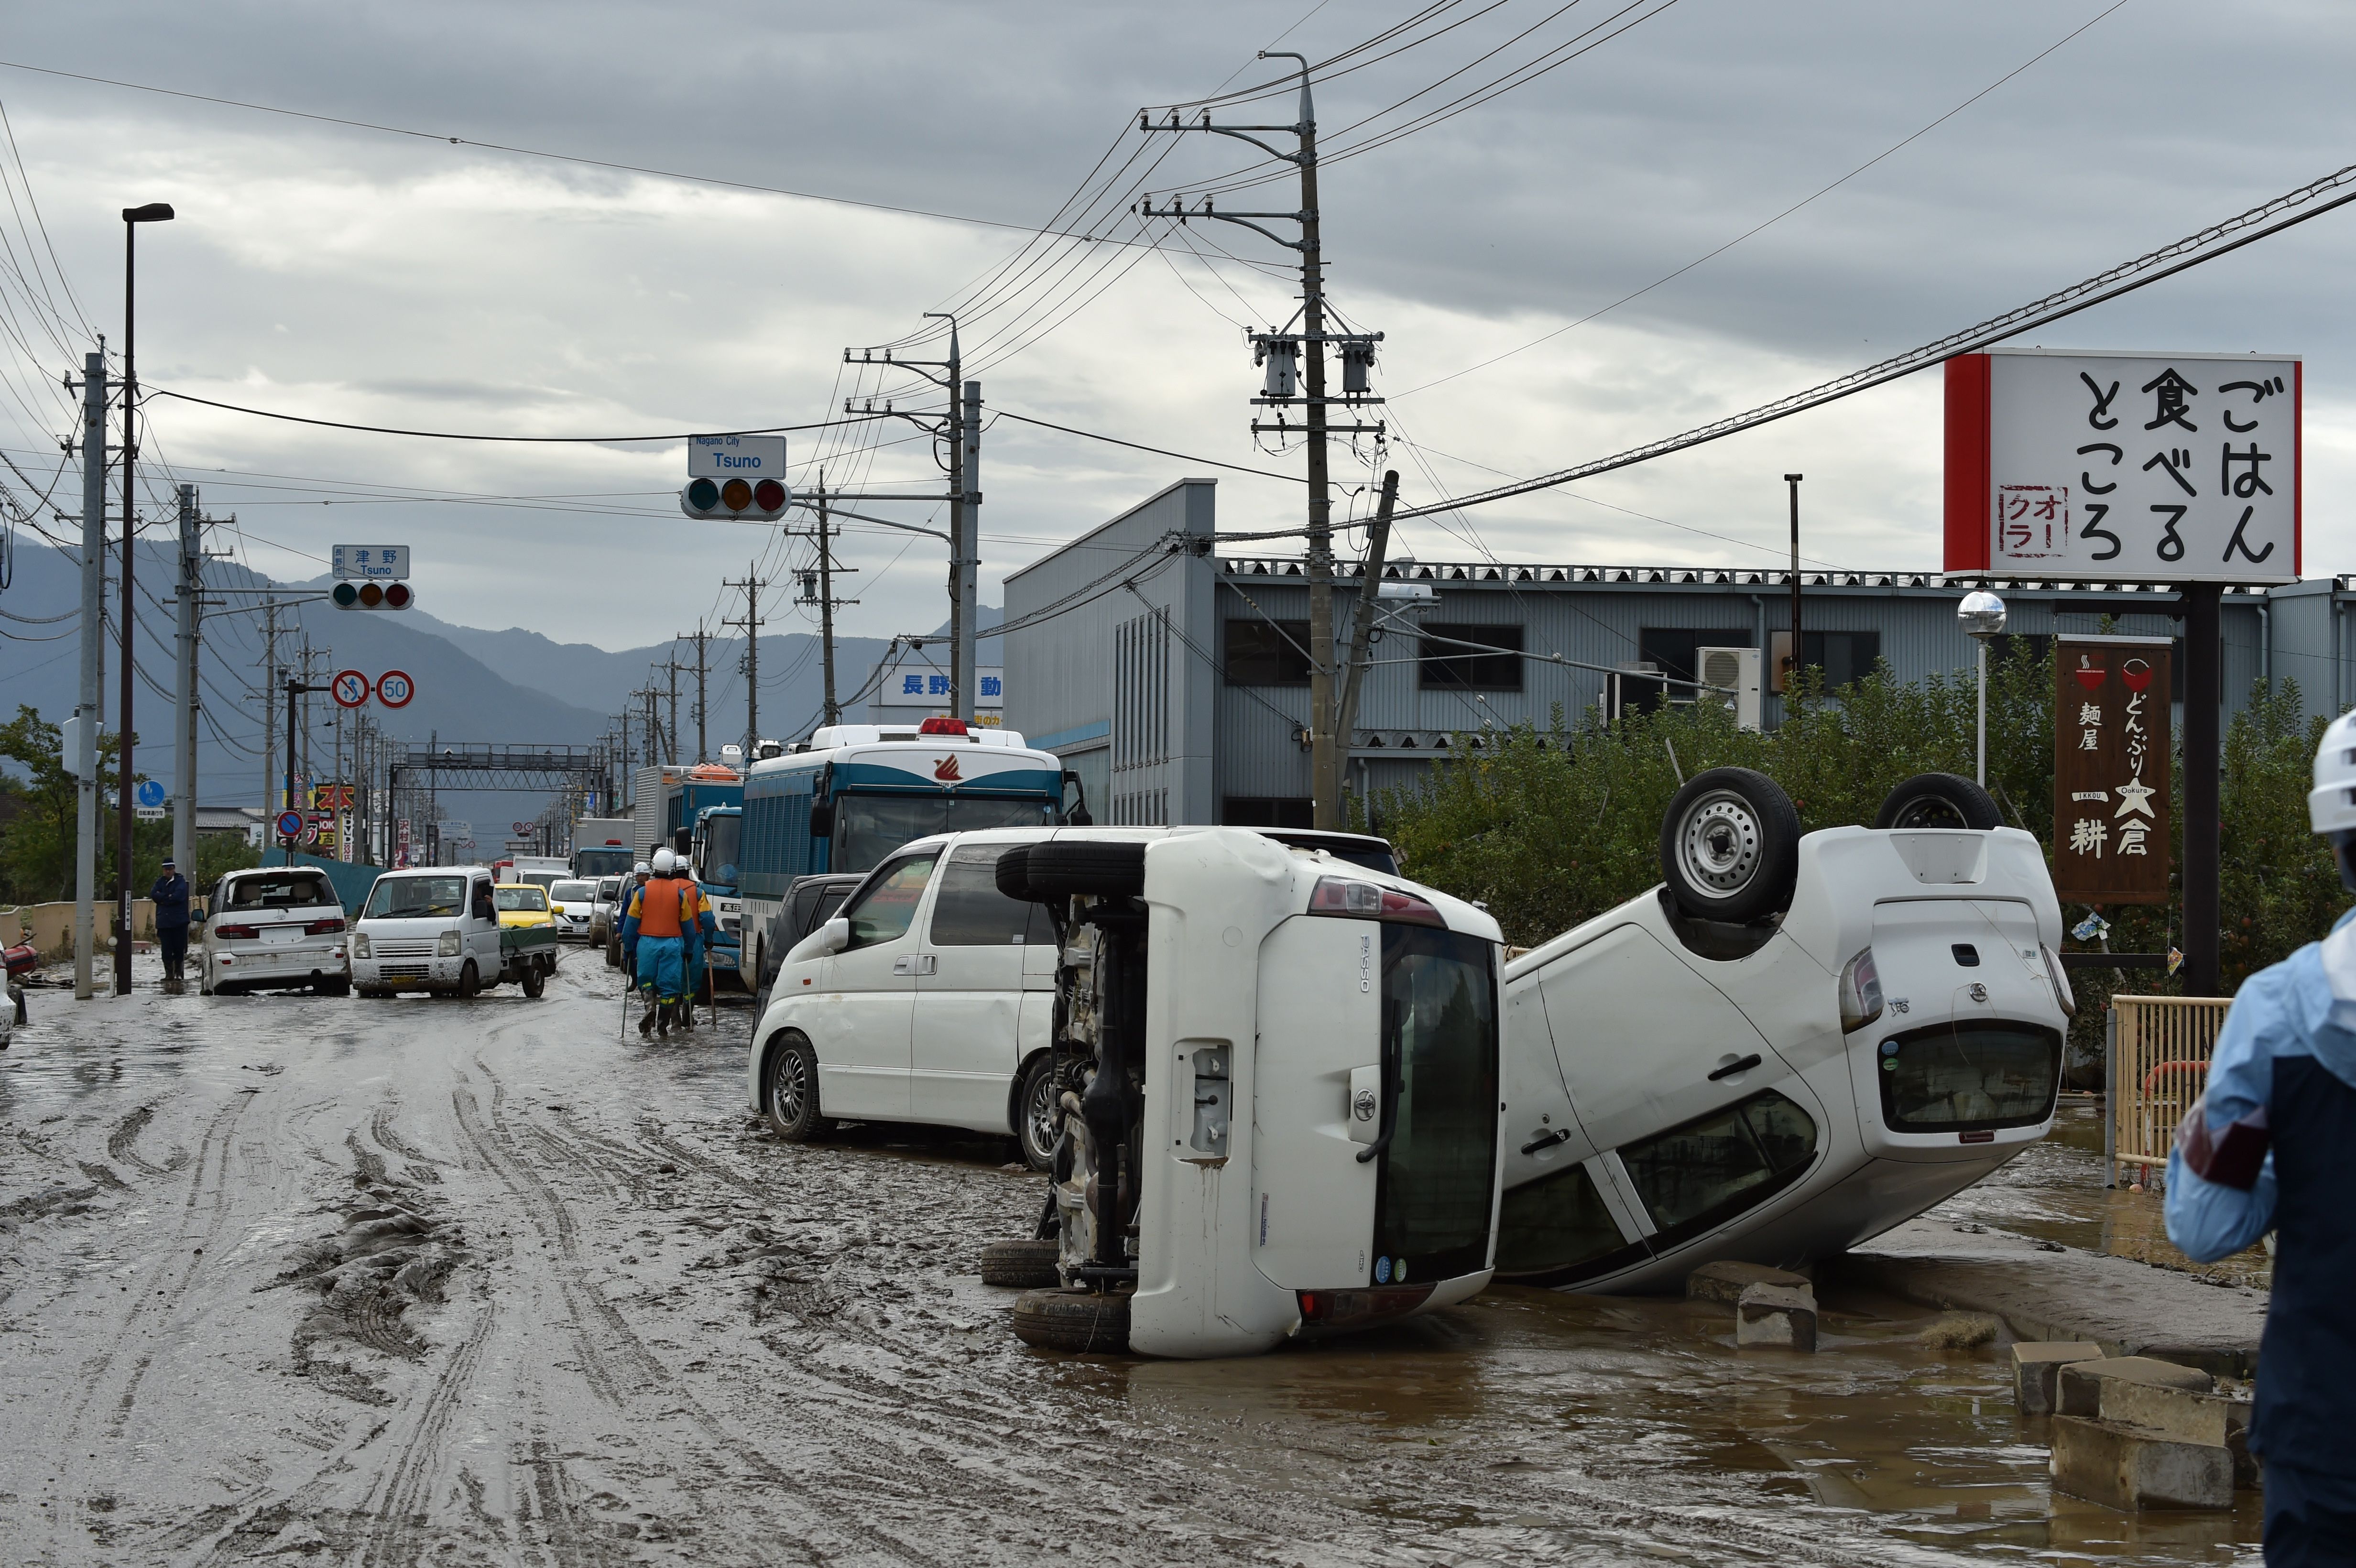 Overturned vehicles sit on the side of a muddy road in the aftermath of Typhoon Hagibis in Nagano 